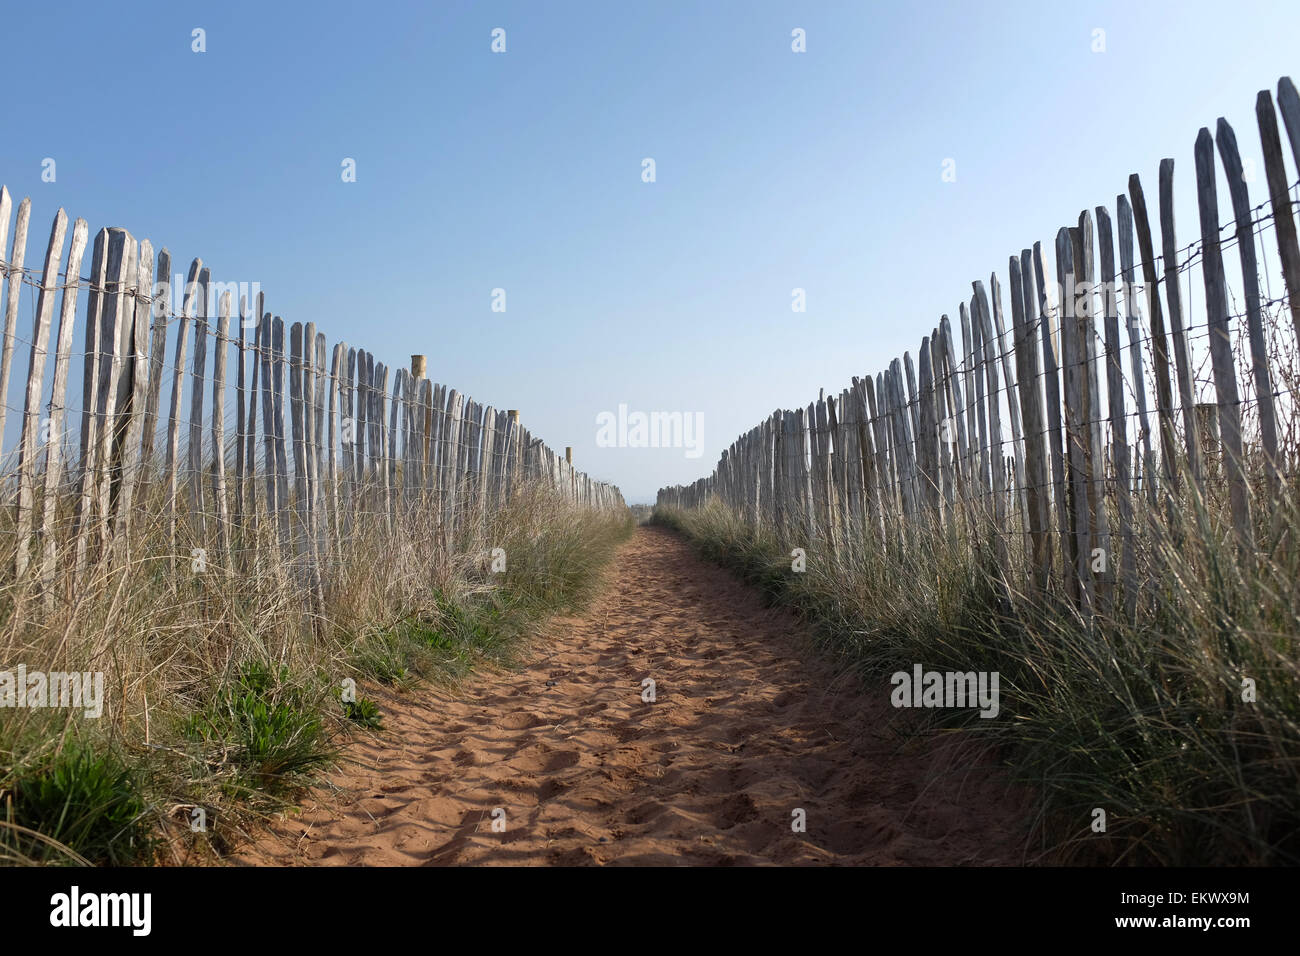 Sandy footpath with a blue sky and wooden fence UK Stock Photo